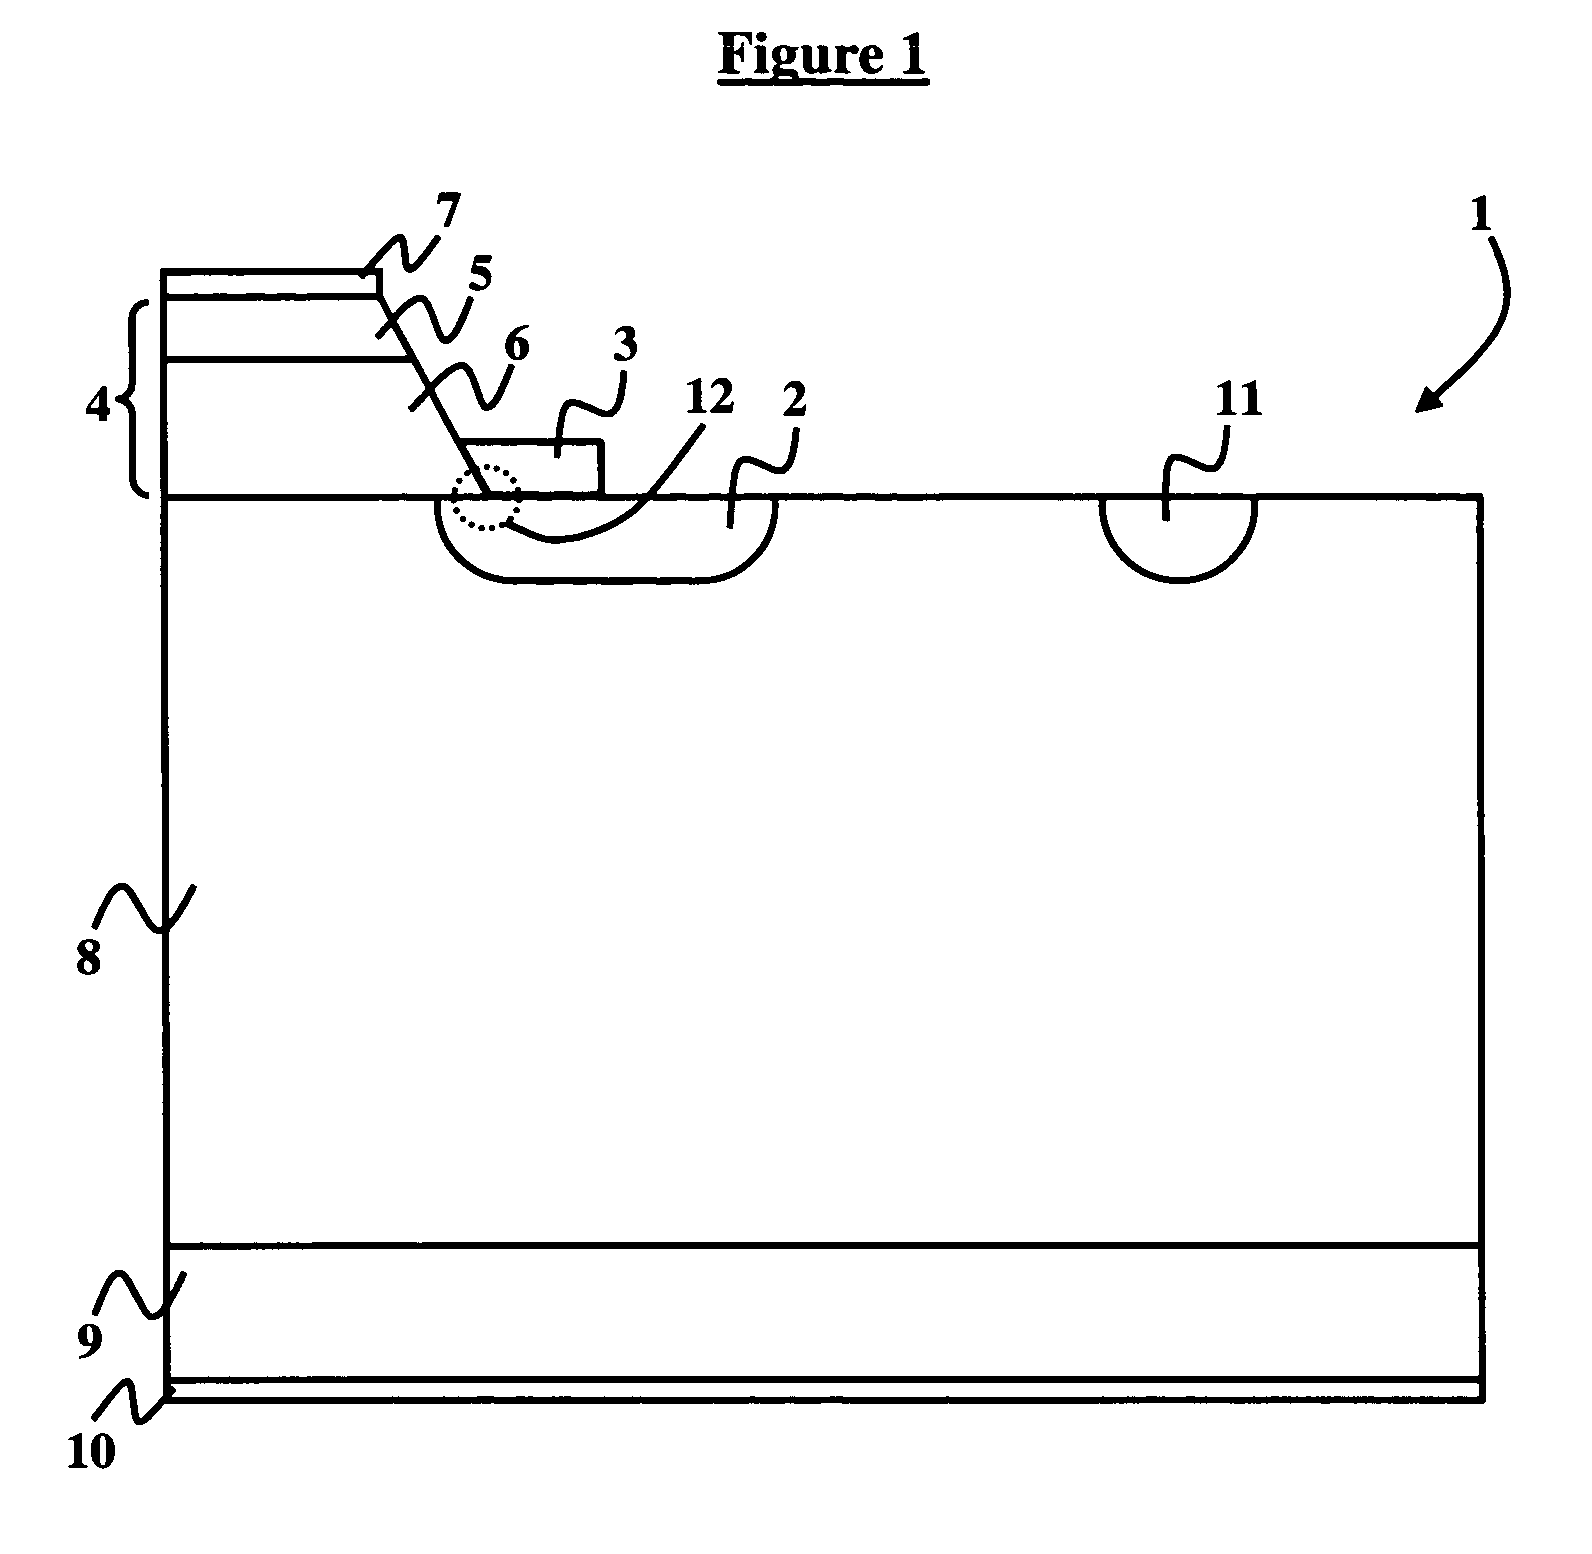 Interacting current spreader and junction extender to increase the voltage blocked in the off state of a high power semiconductor device